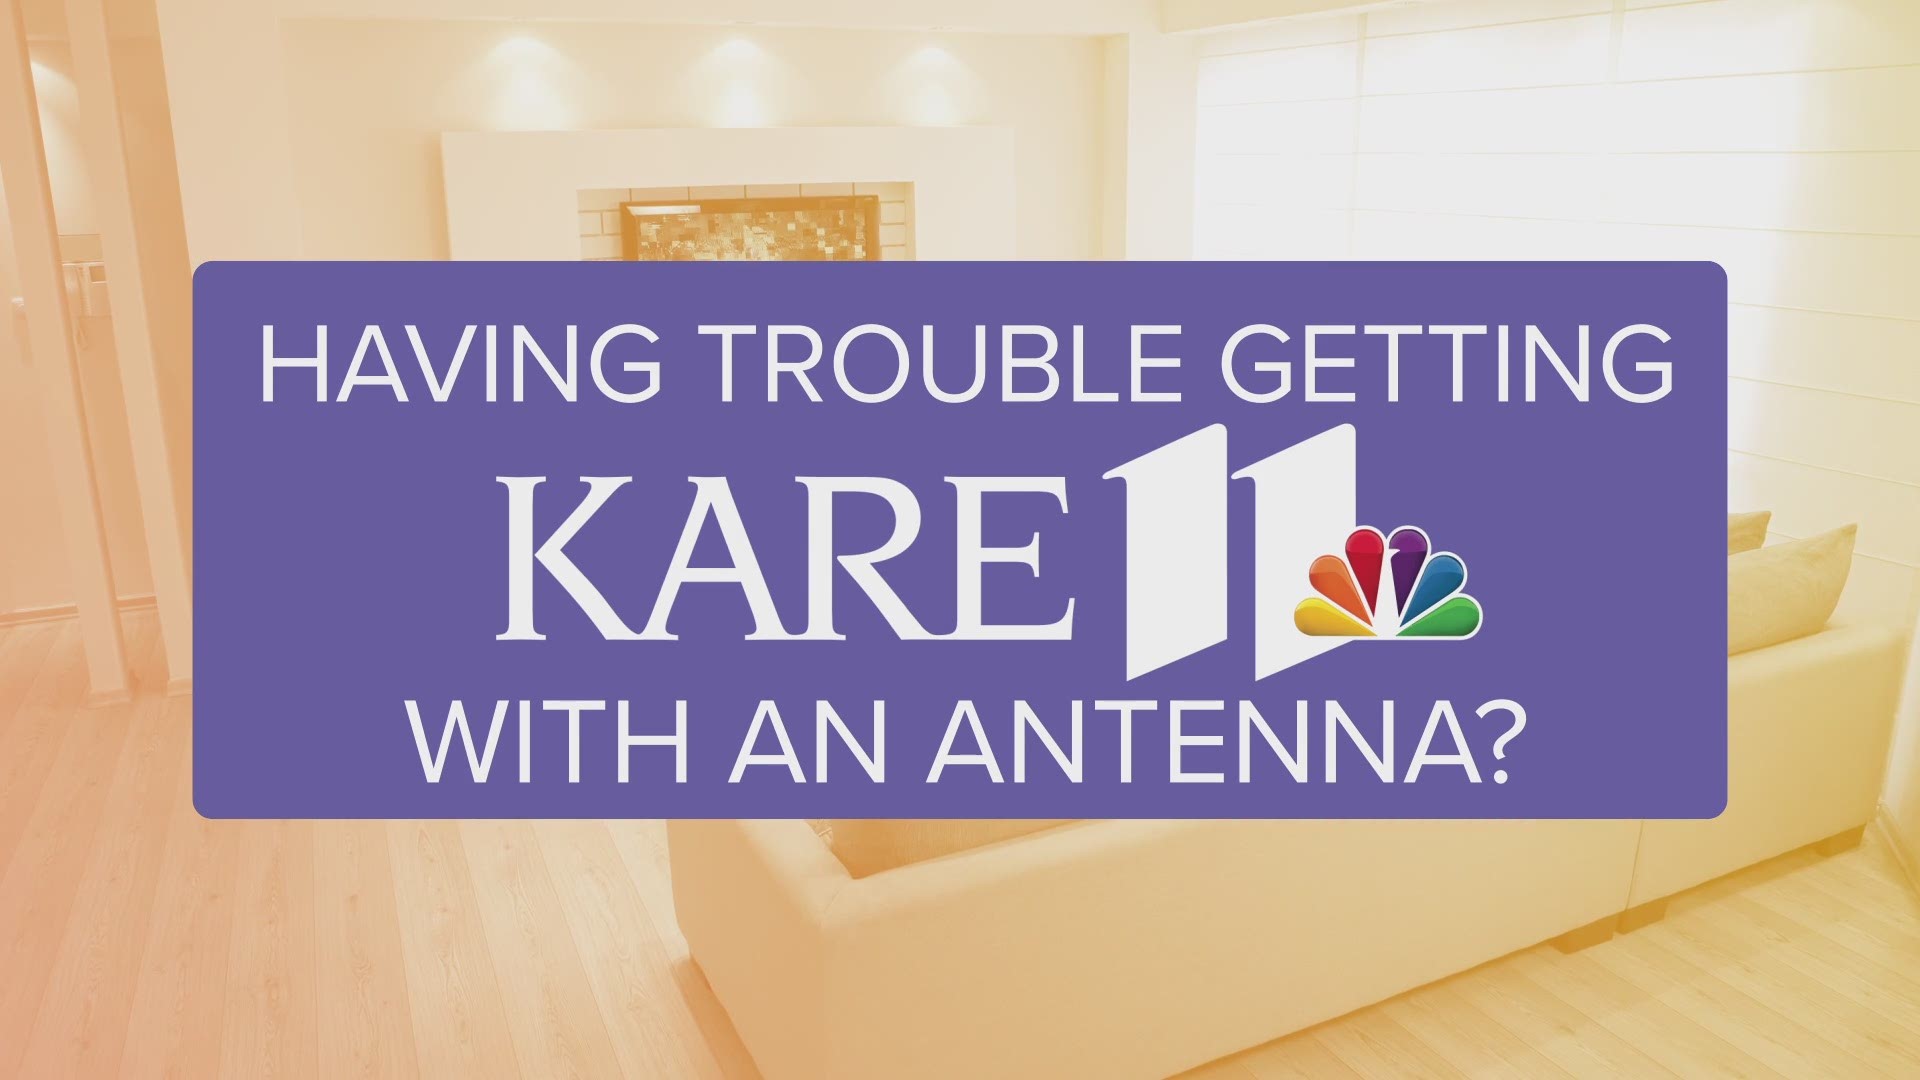 Here's a step-by-step guide to watching KARE 11 via an antenna.